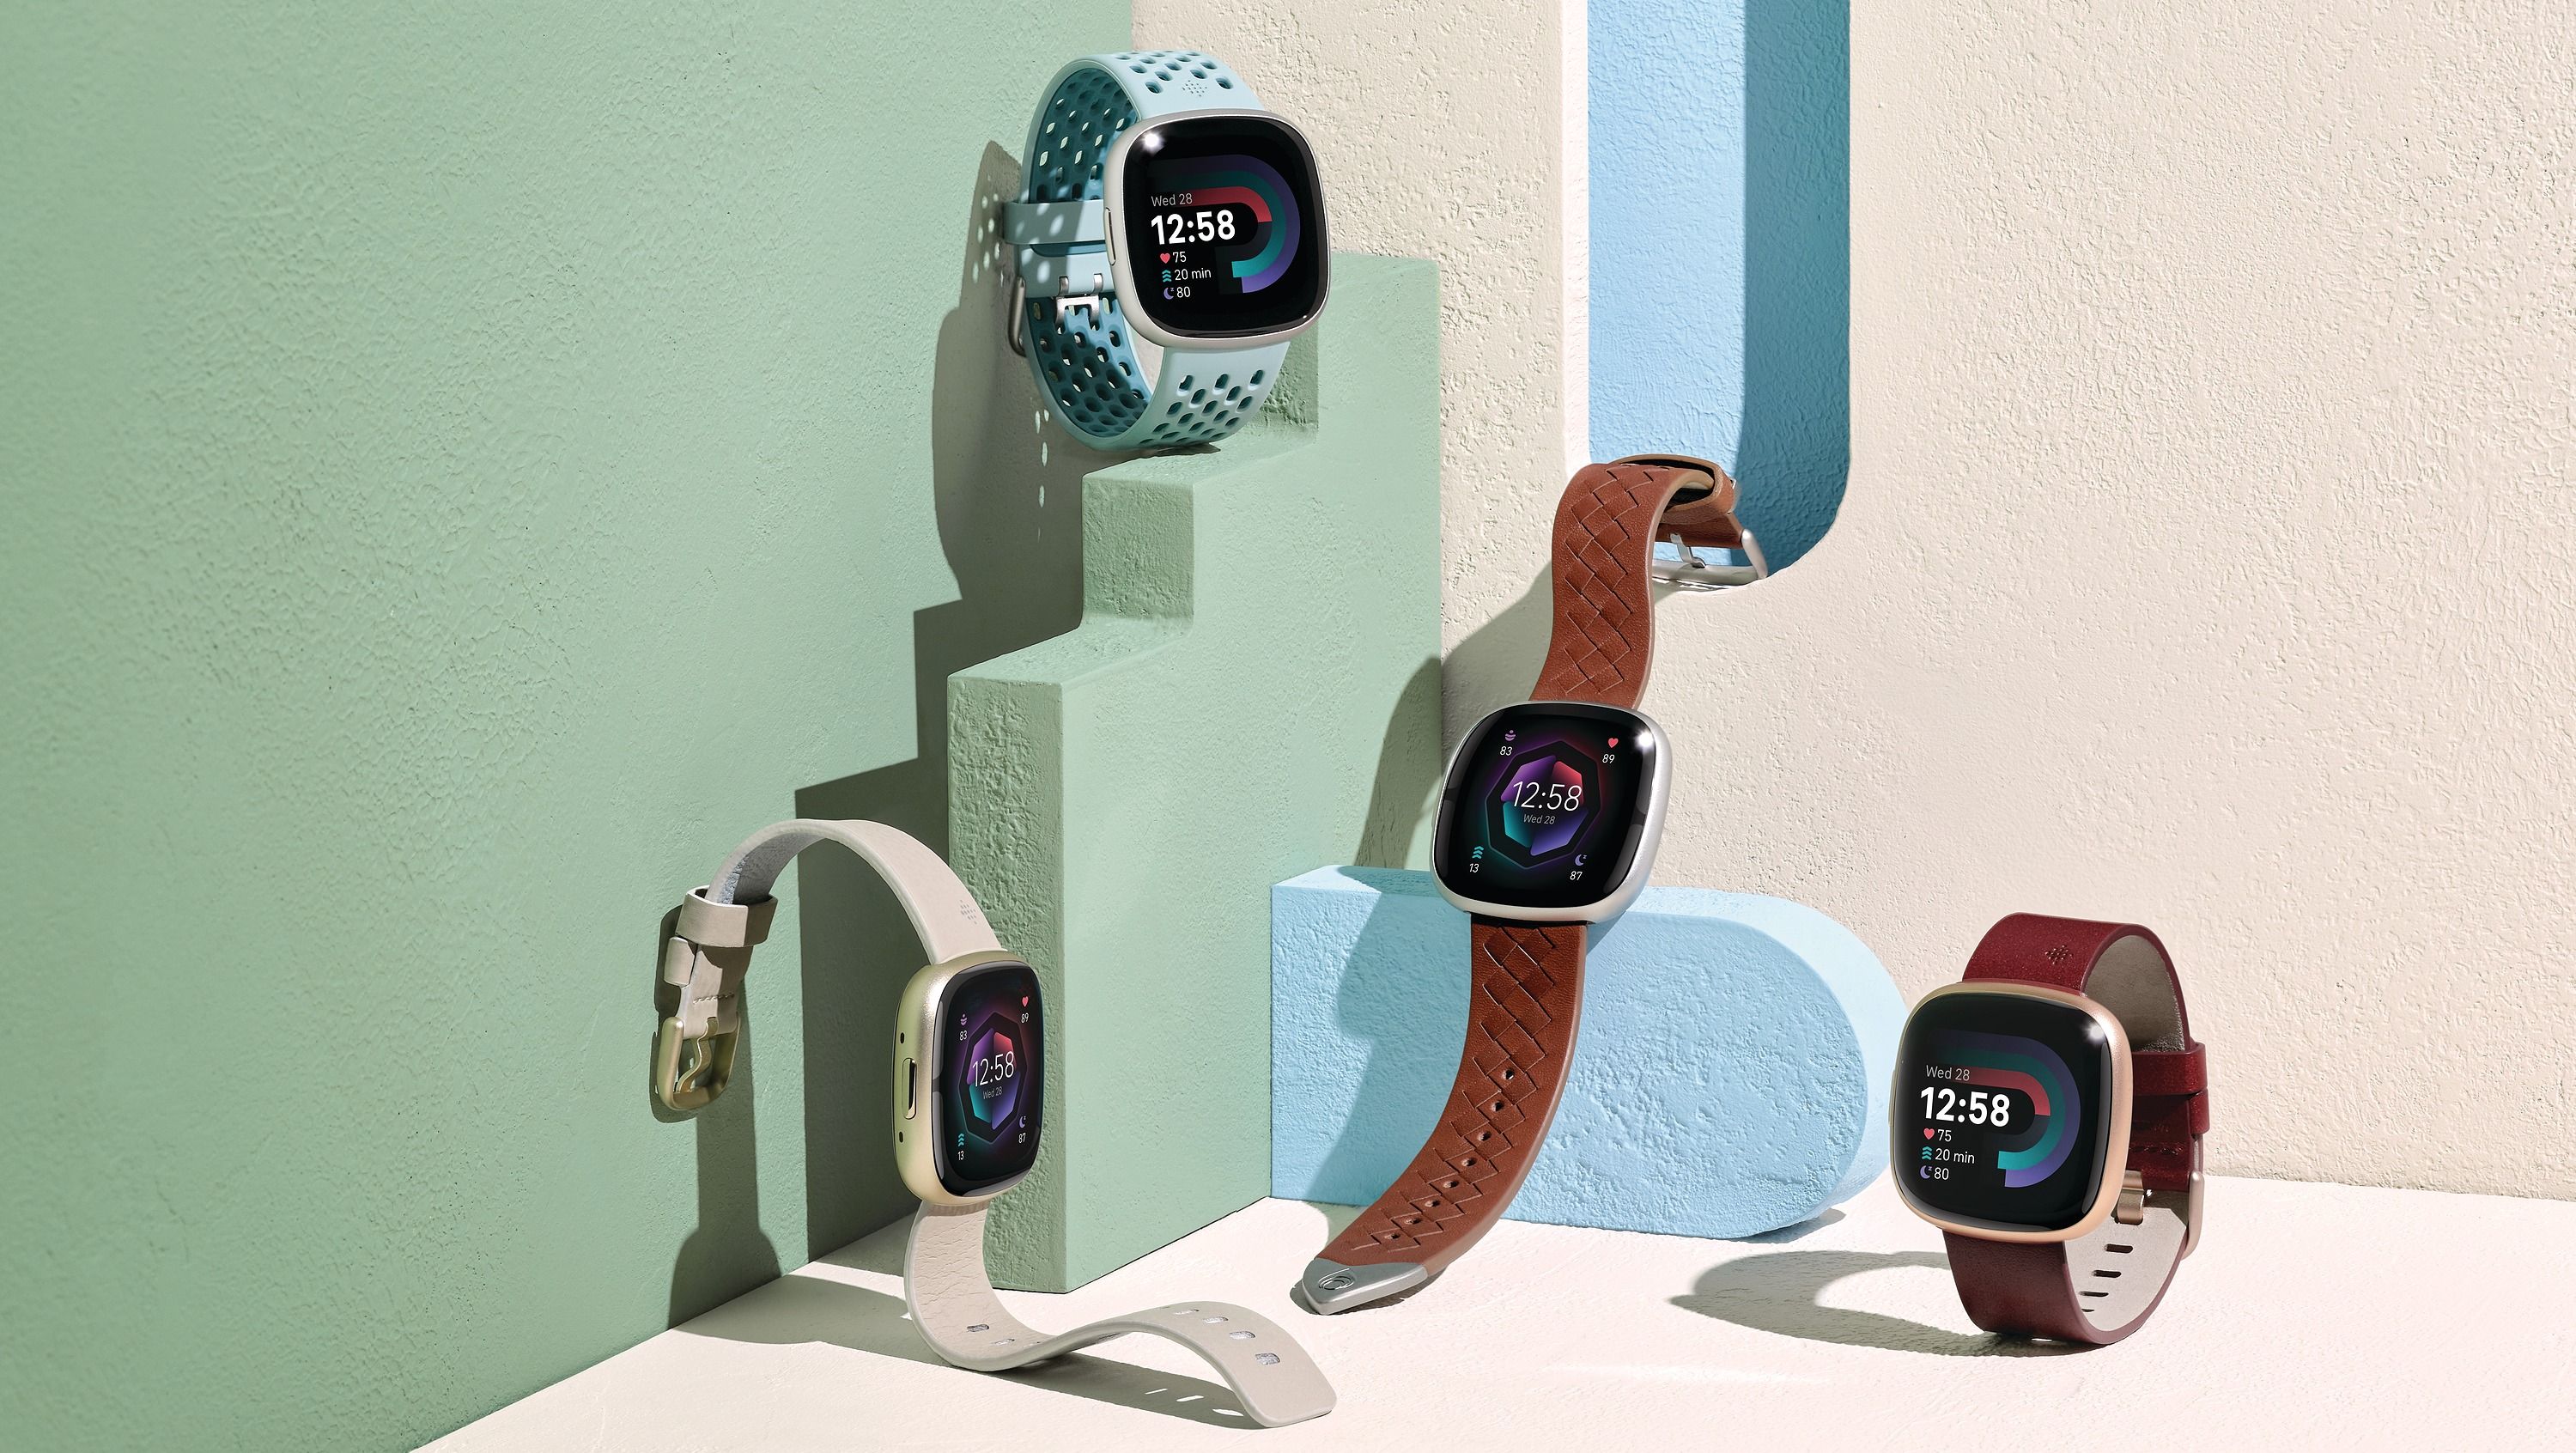 Two new Fitbit watches are coming this fall with Google apps in tow